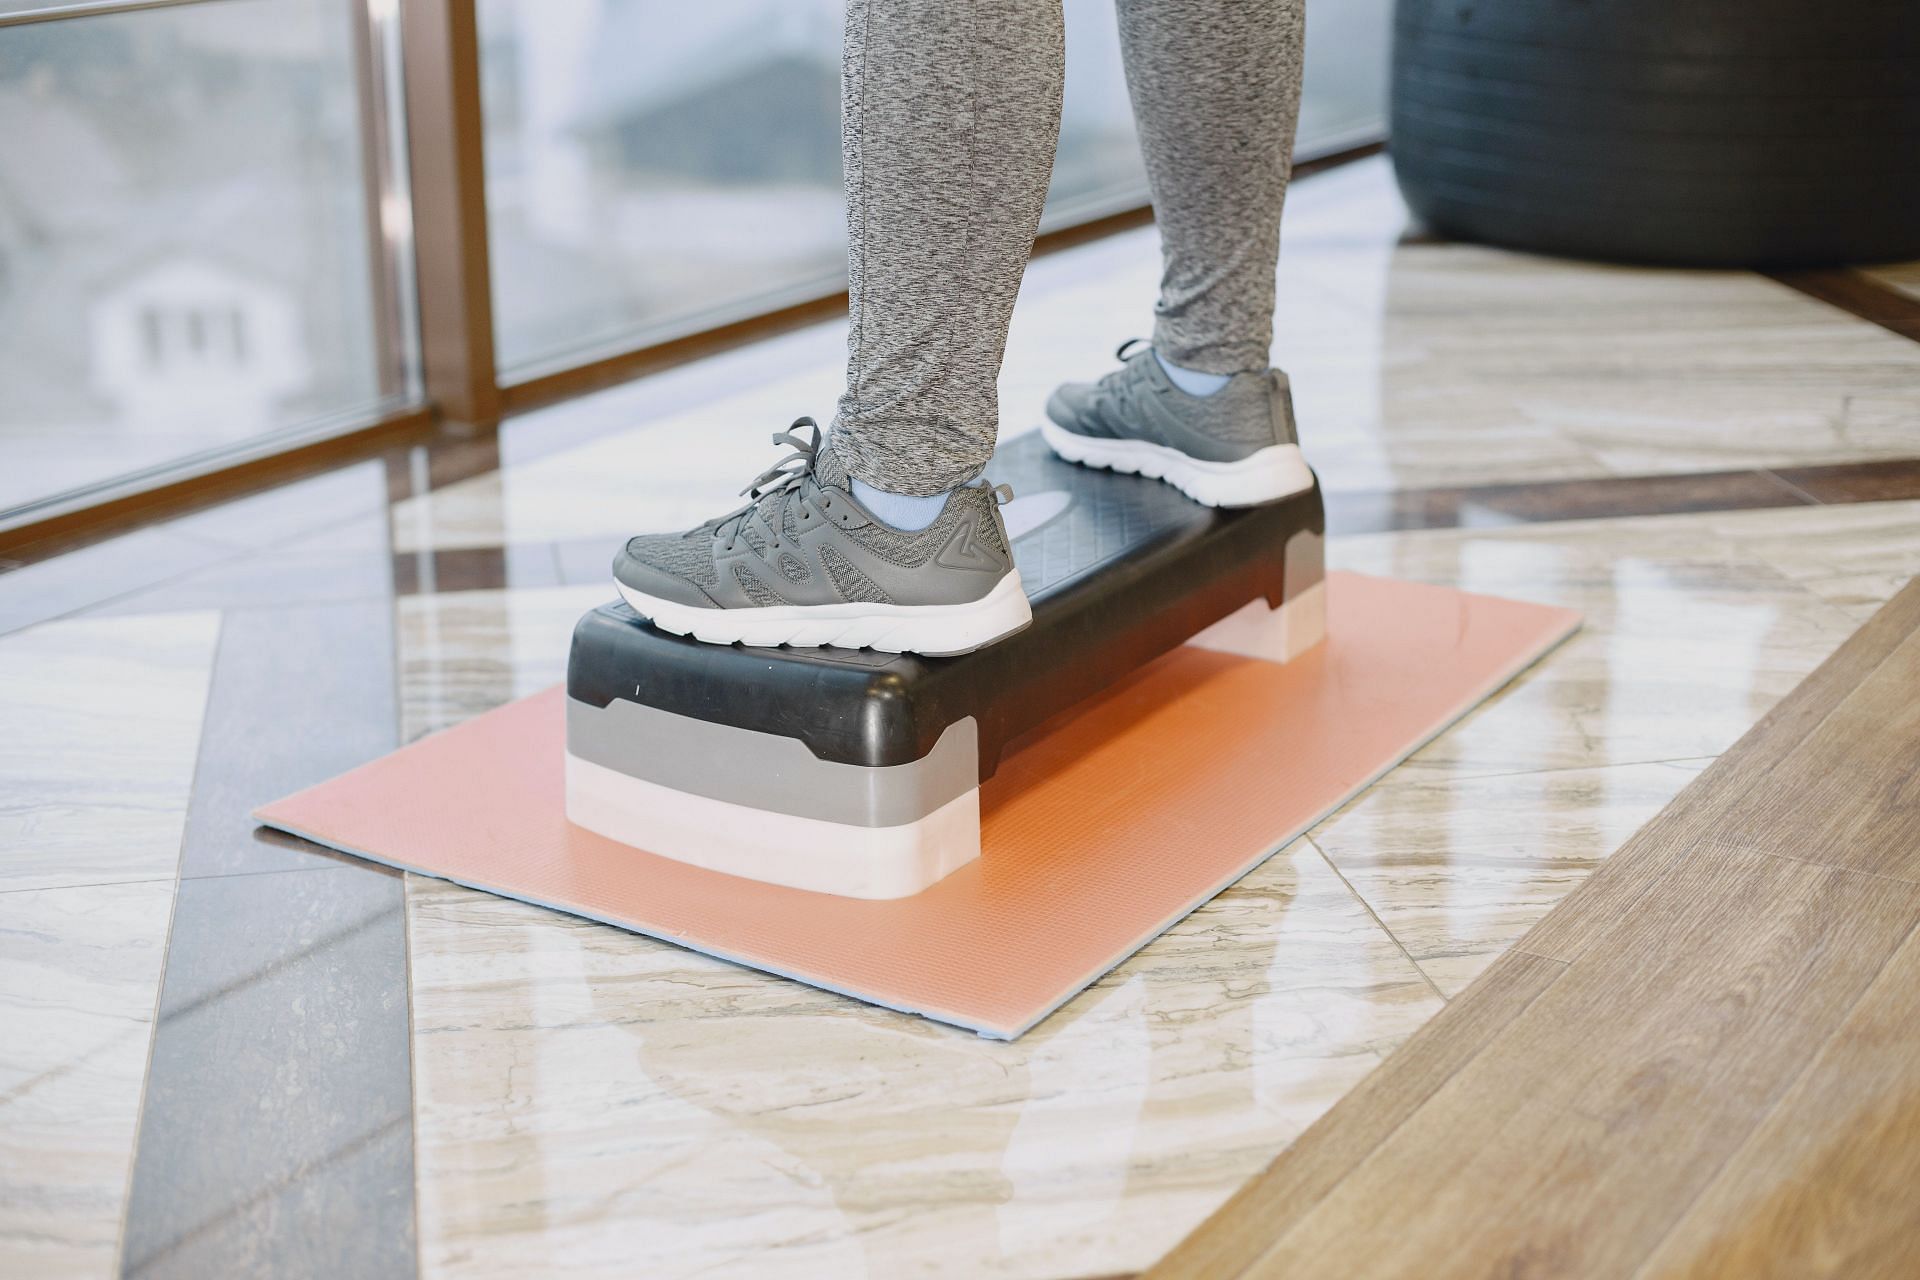 Step platform are versatile and can be used for variety of workouts. (Image via Pexels / Gustavo Fring)